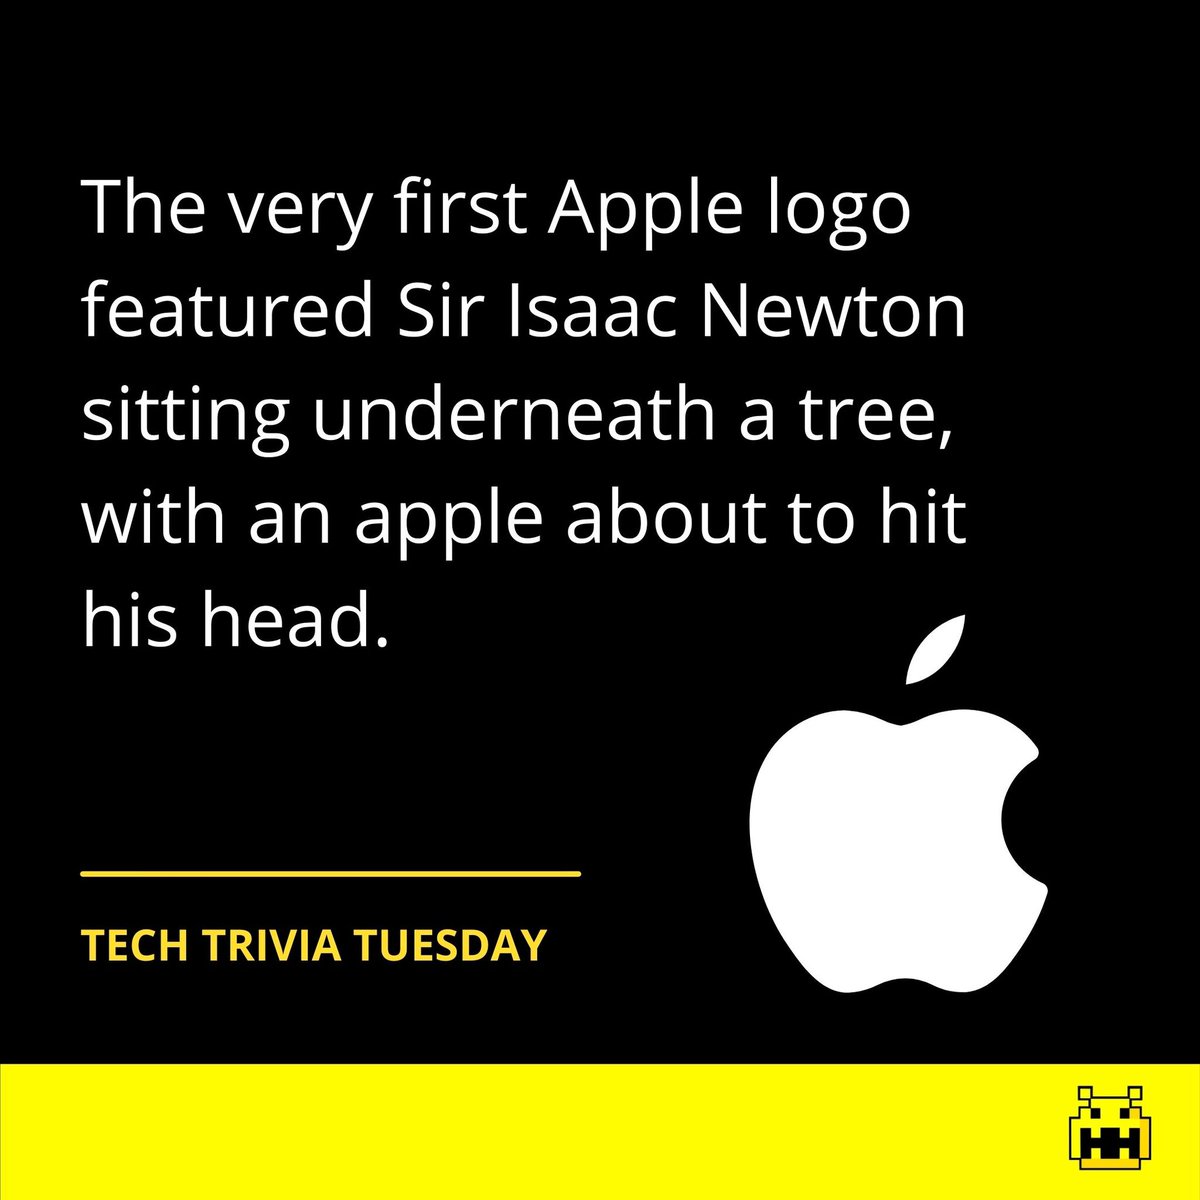 Did you know that the very first Apple logo featured Sir Isaac Newton sitting underneath a tree, with an apple about to hit his head? 

Do you have a favorite tech fact? 

#bytesizebuddies #bytesizedigital #builtbybytesize #webdesign  #webdevelper #webdevelopment #website